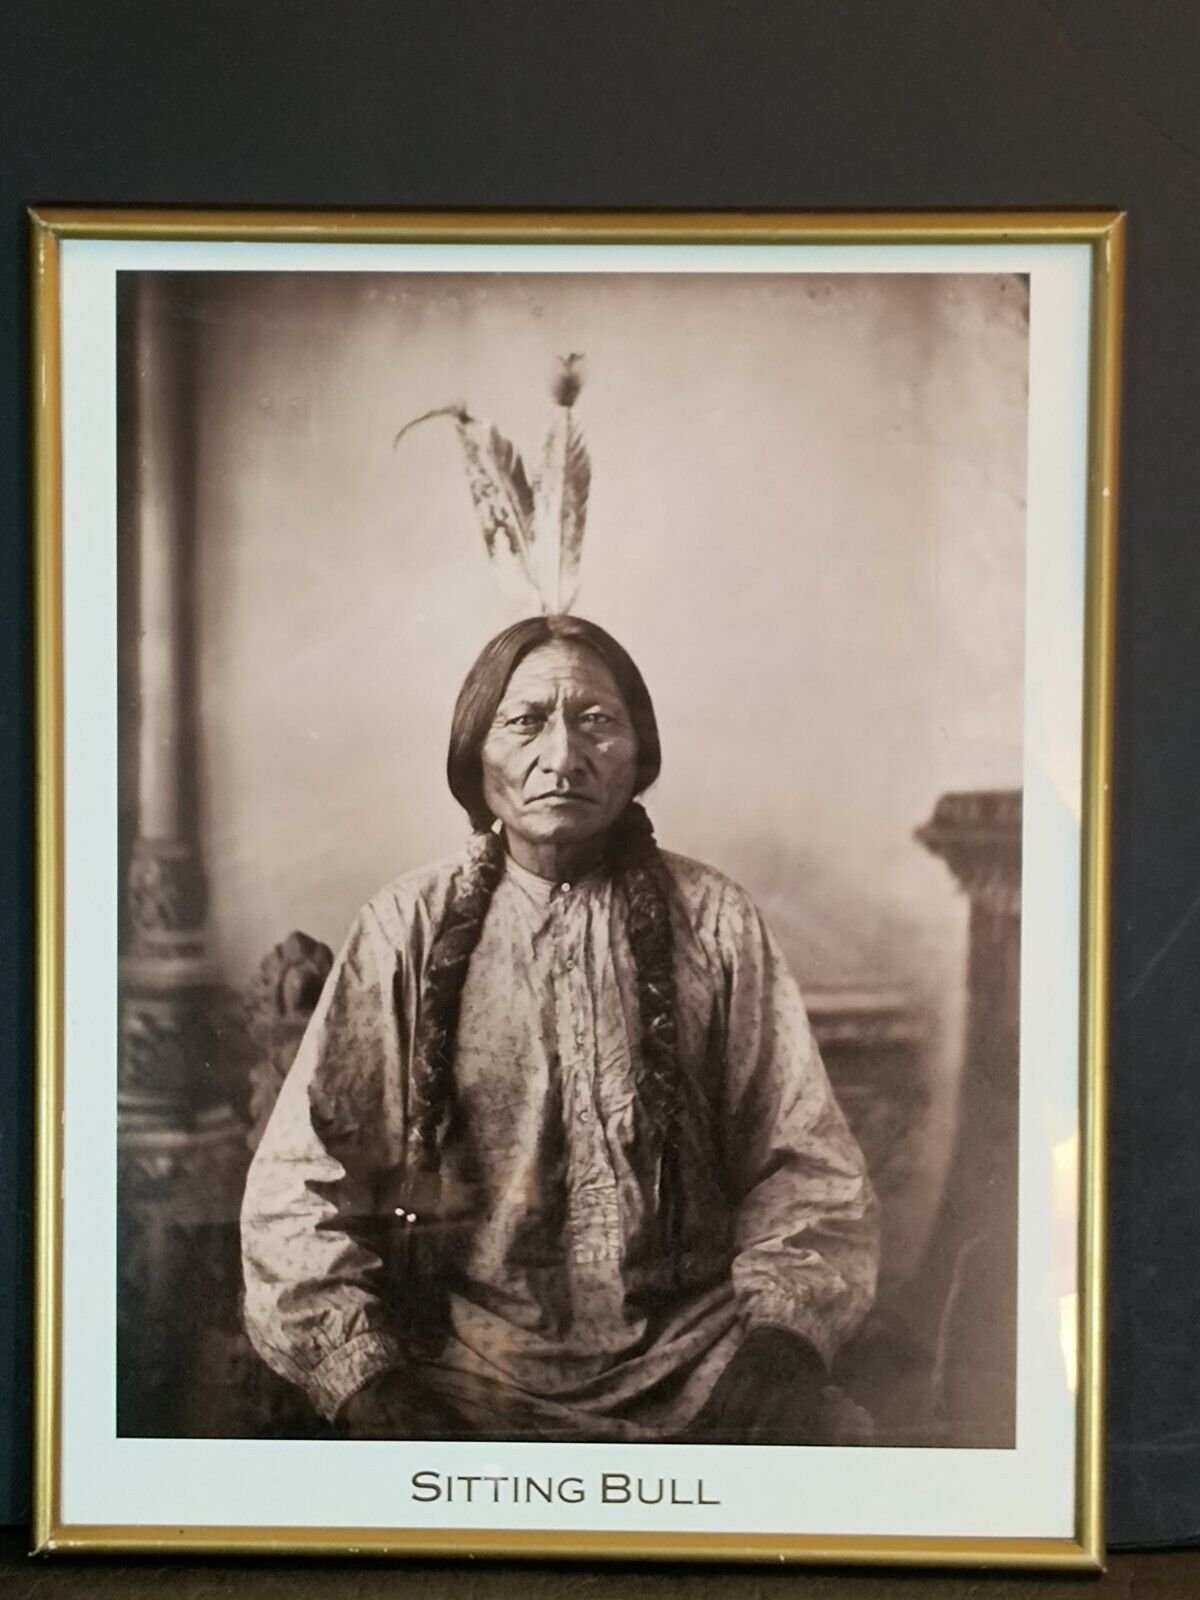 Sitting Bull Sioux Leader Lakota Native American Vintage Picture Framed 20x16